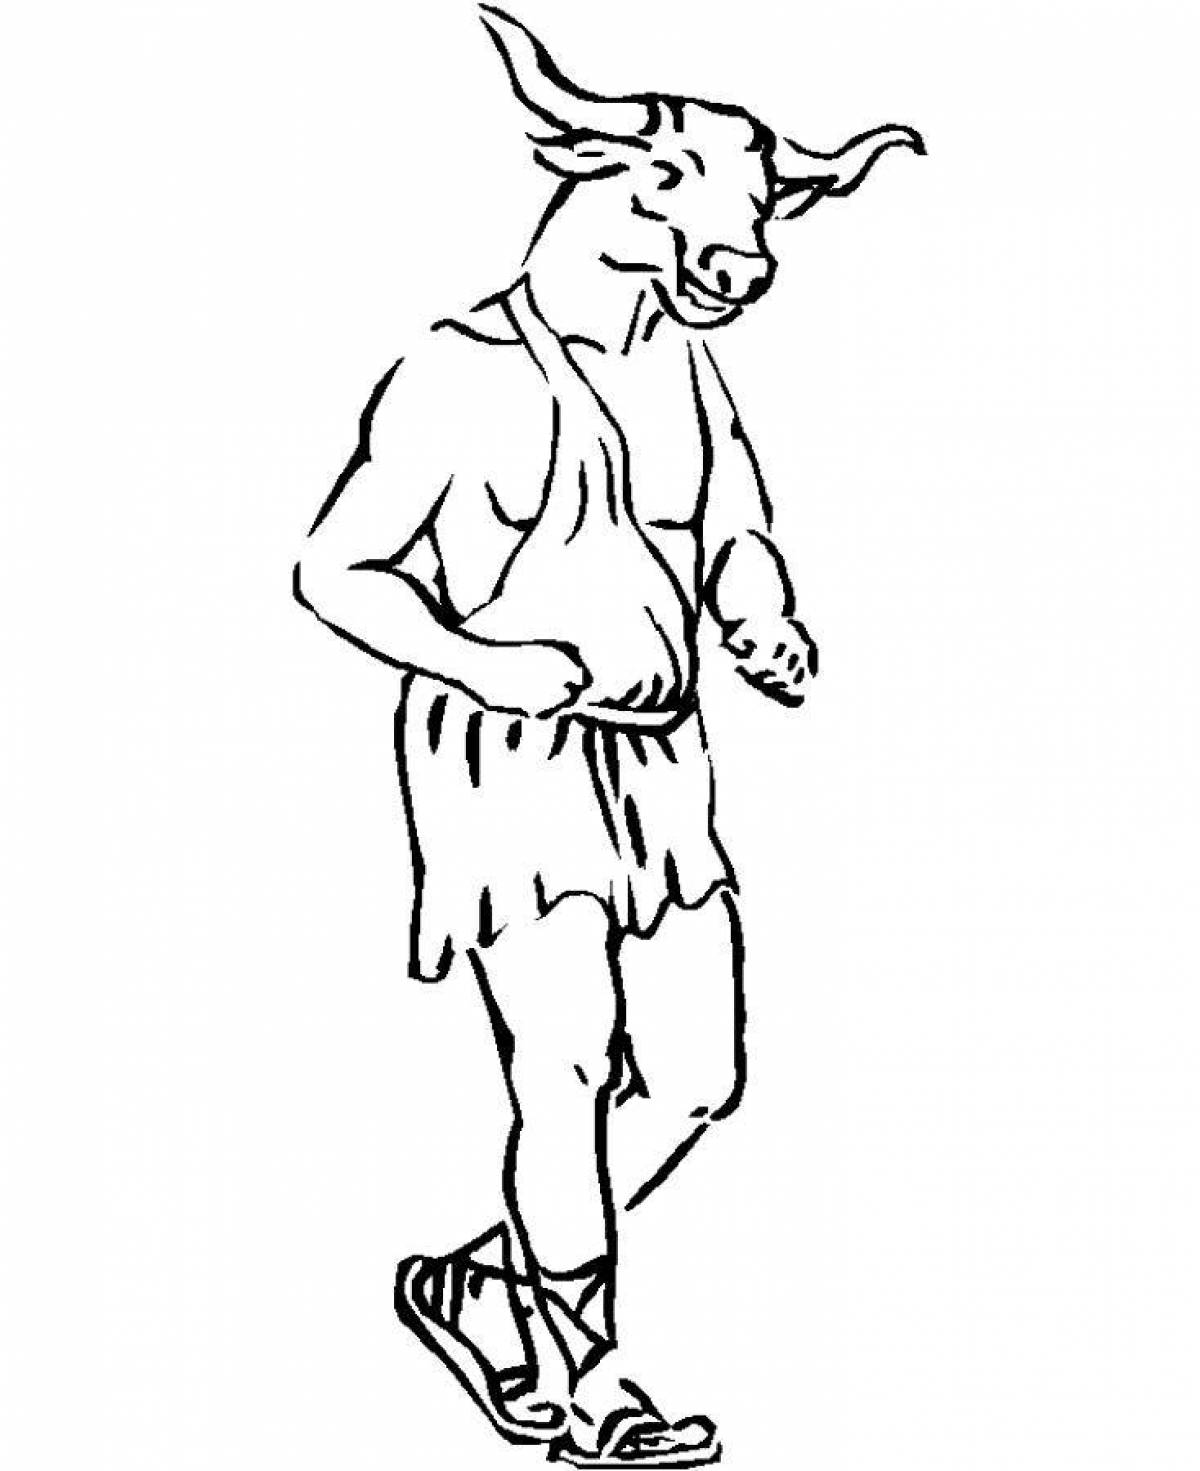 Coloring page dazzling theseus and the minotaur